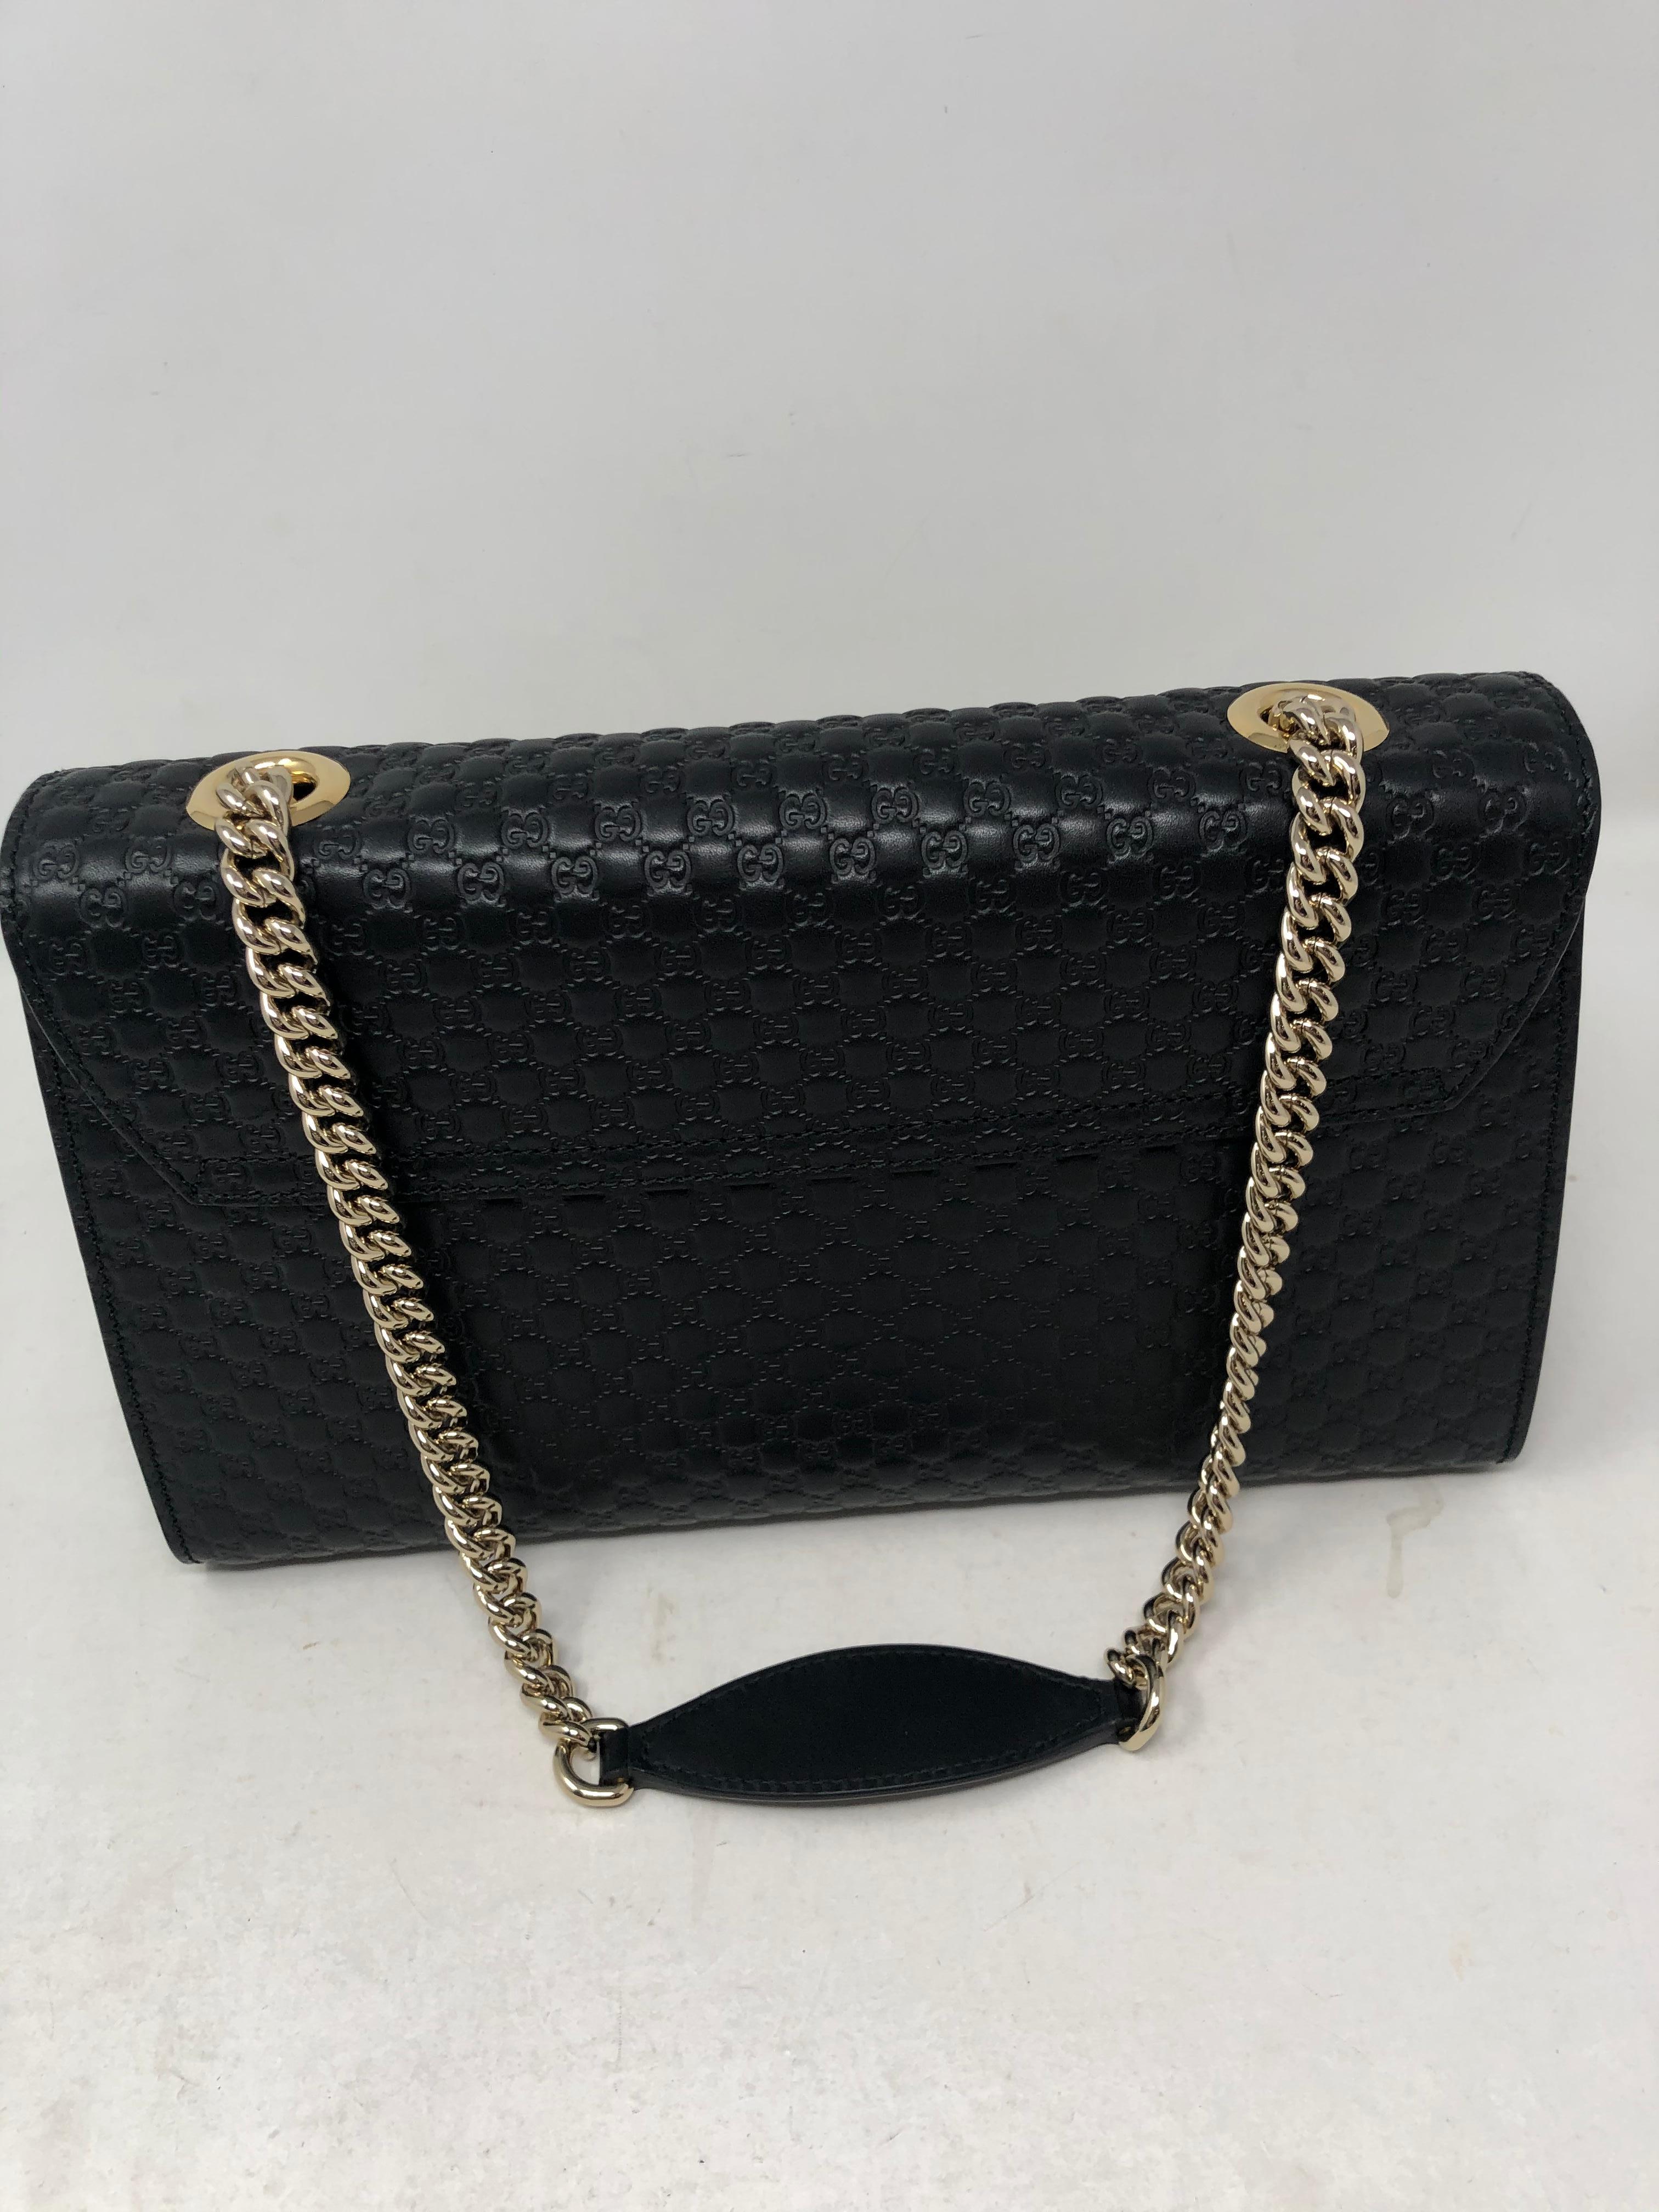 Gucci Embossed Black Leather Bag 1